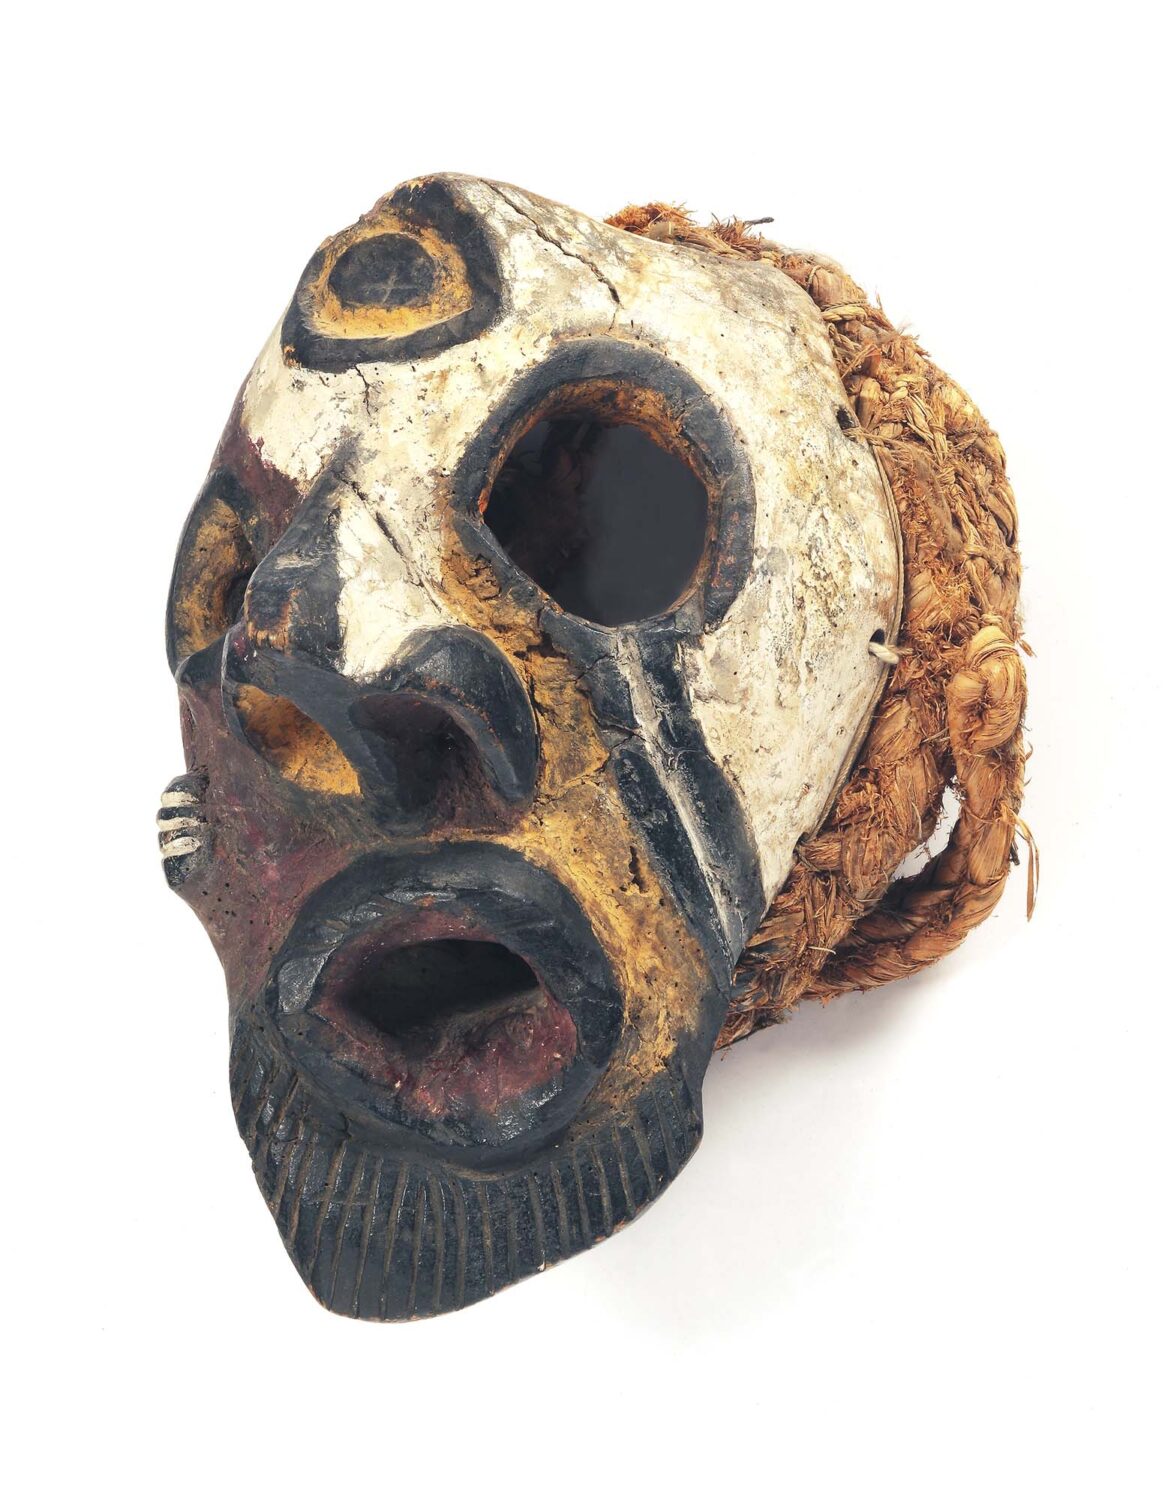 thumbnail of Mask with facial distortion made with wood with red, white, and black pigments, raffia.